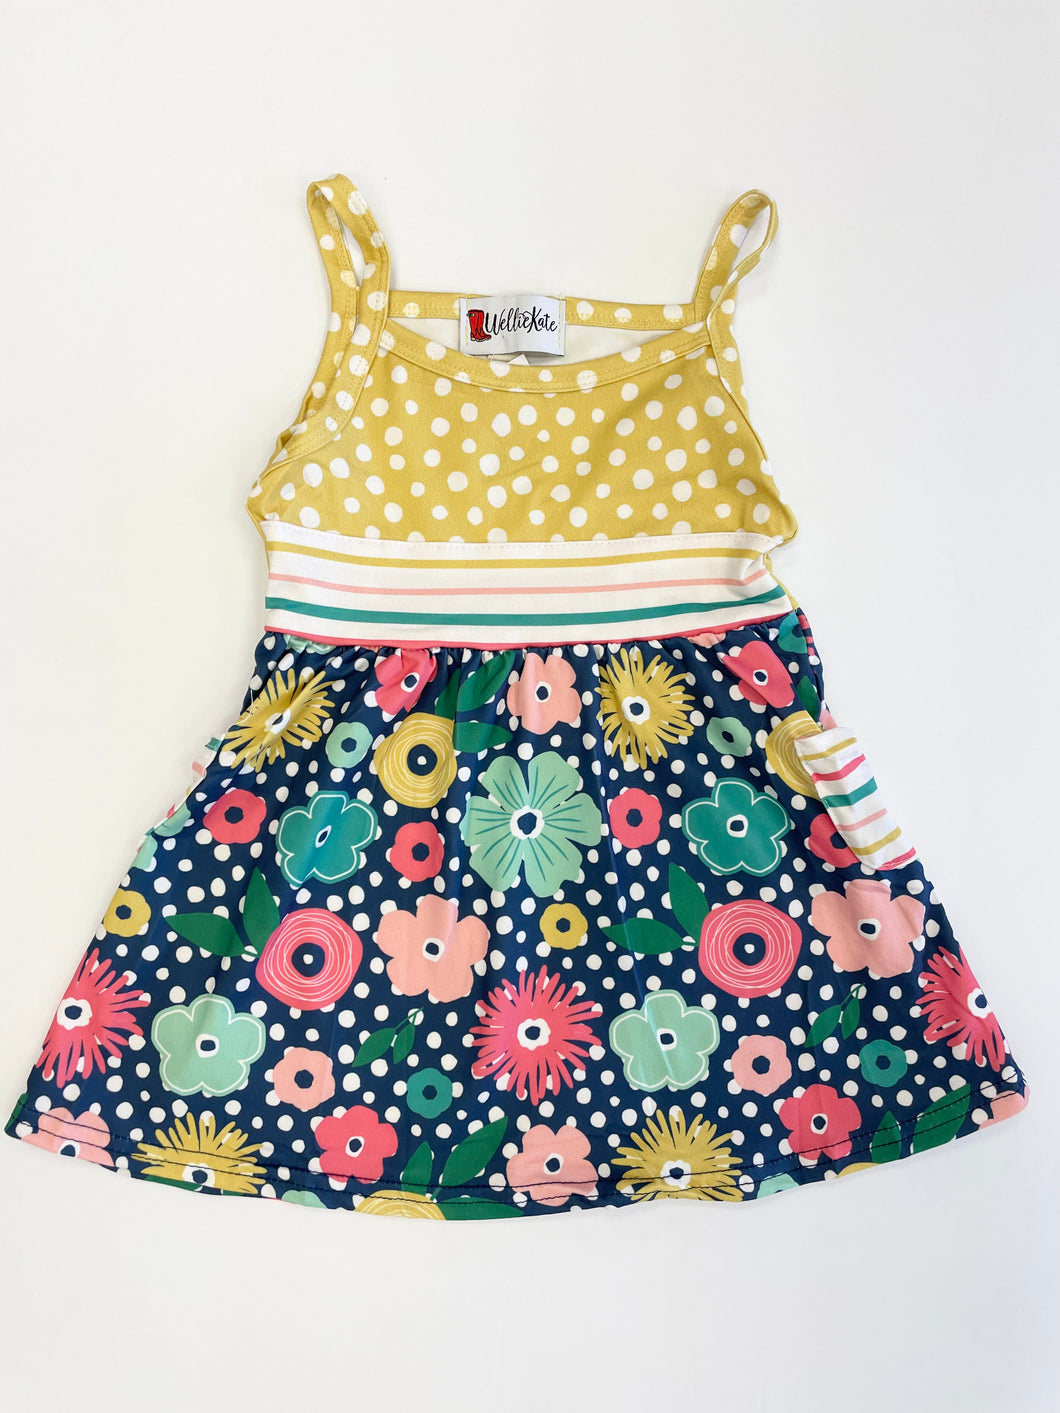 Girls' floral sun dress. Tank top straps, pockets and unique colorful pattern.